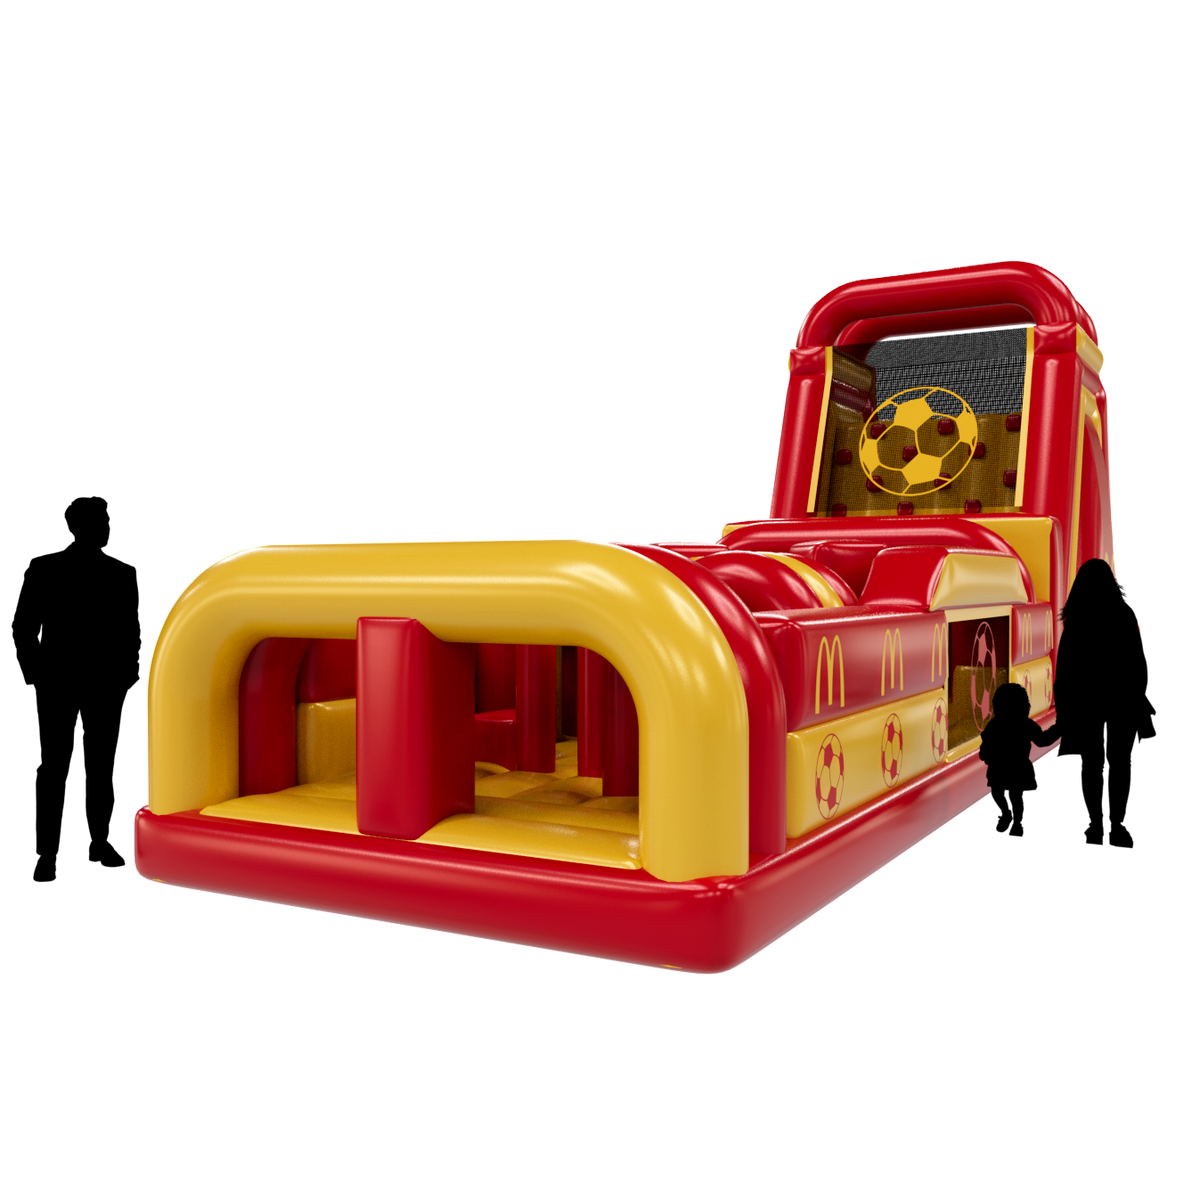 McDonald's obstacle course inflatable